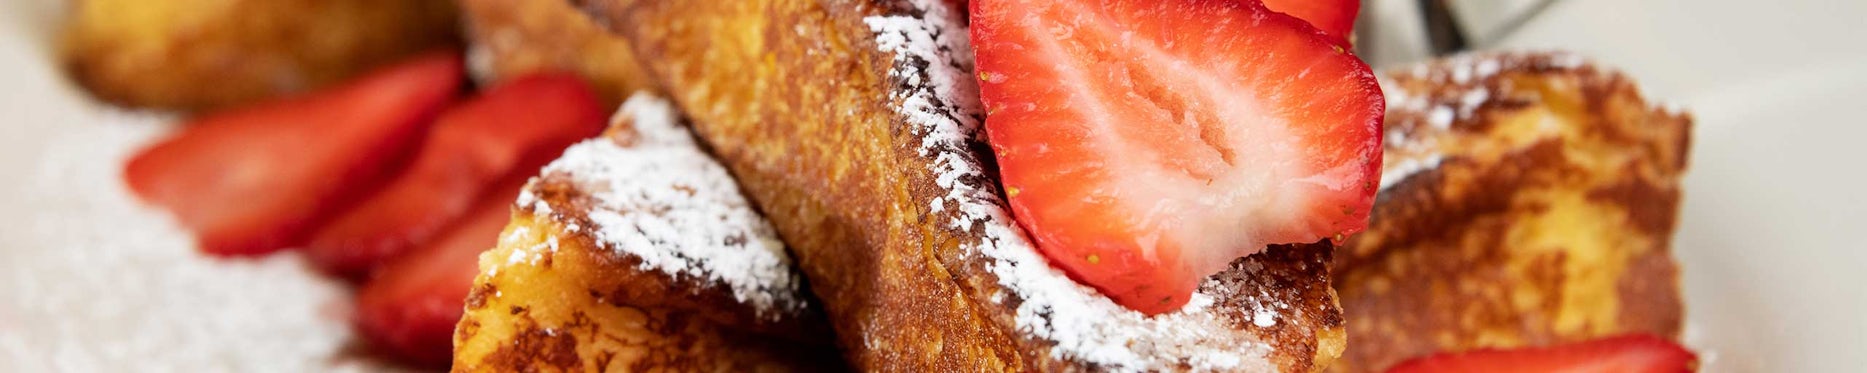 Grand Lux Cafe - Weekend Brunch Pancakes Waffles French Toast - Order Online